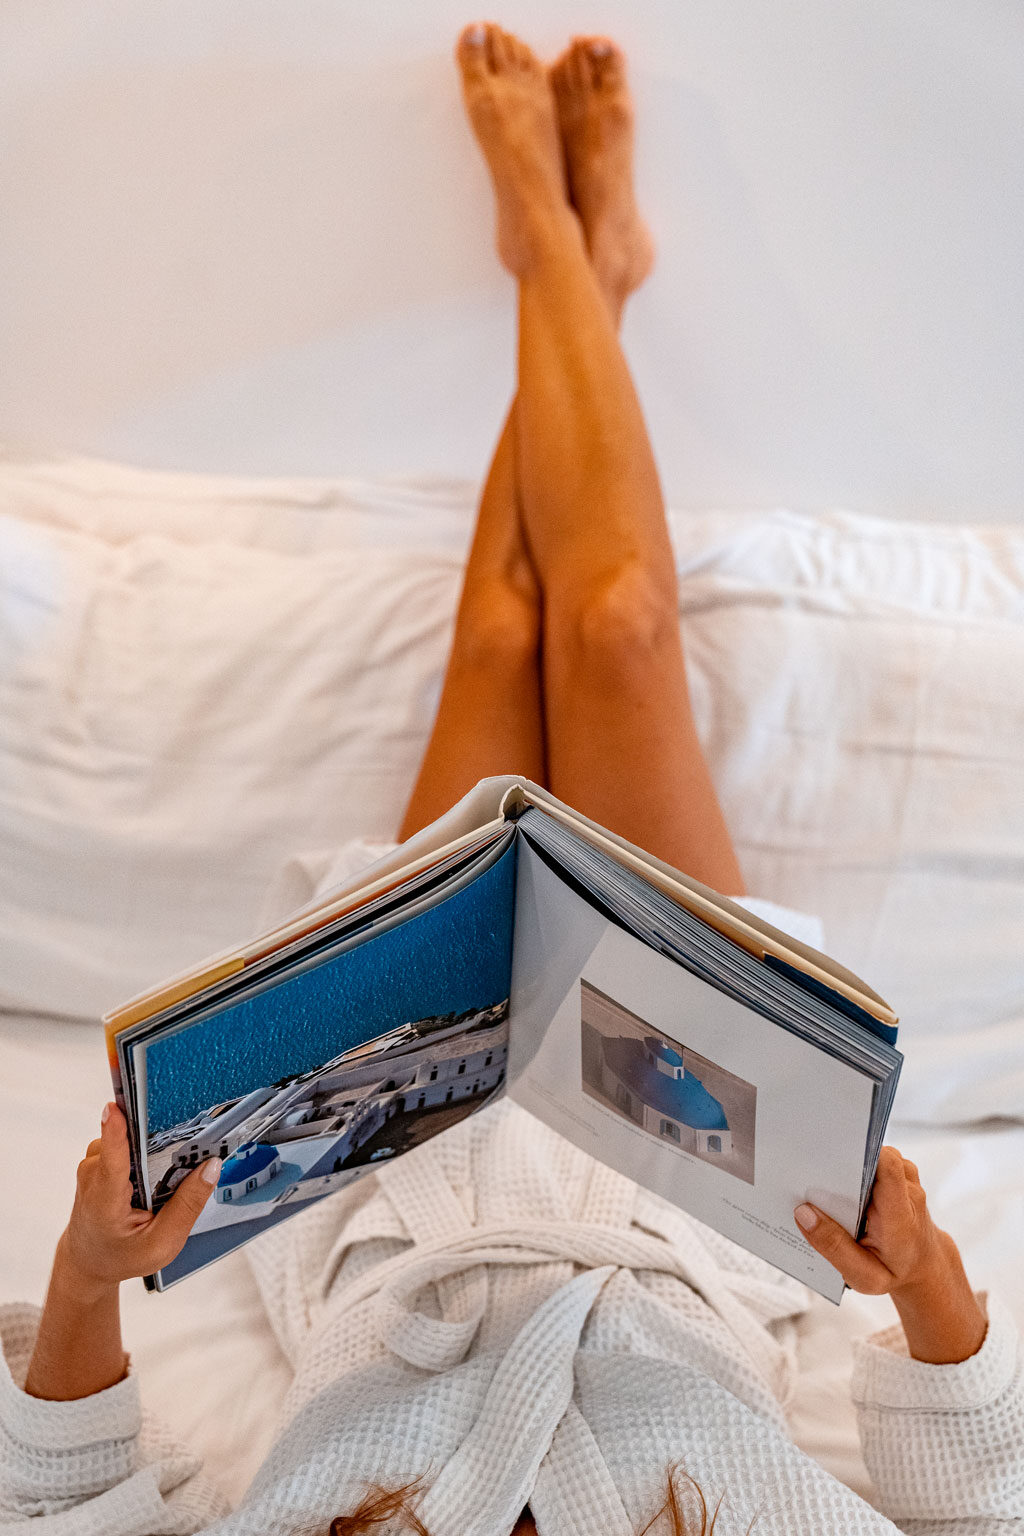 Legs Up The Wall Reading Book in Santorini